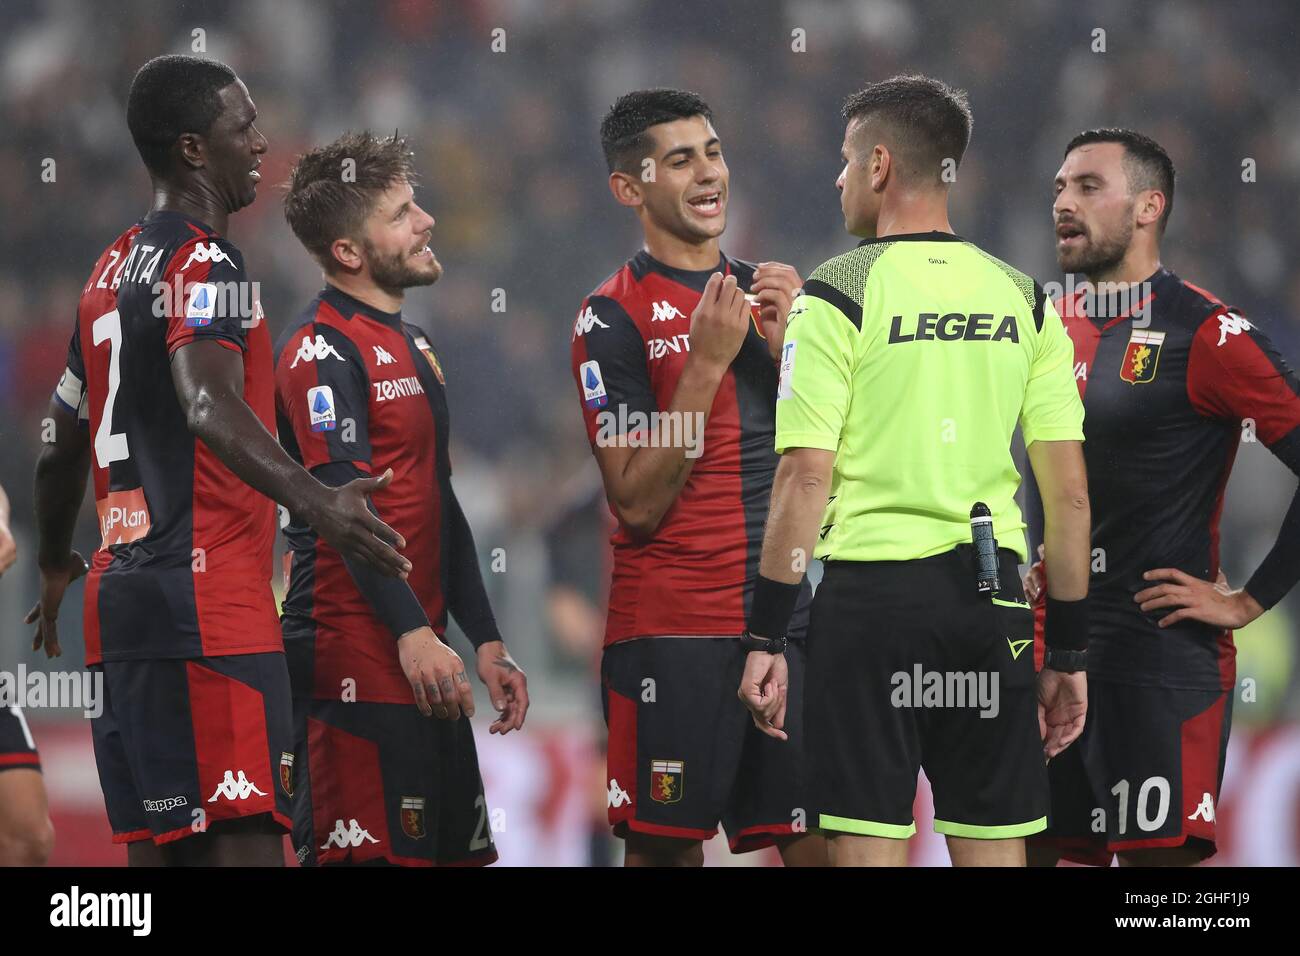 Genoa players Christian Zapata, Lasse Schone, Cristian Romero and Sinan Gumus protest to the referee Antonio Giua after he awarded Juventus a 90th minute penalty during the Serie A match at Allianz Stadium, Turin. Picture date: 30th October 2019. Picture credit should read: Jonathan Moscrop/Sportimage via PA Images Stock Photo